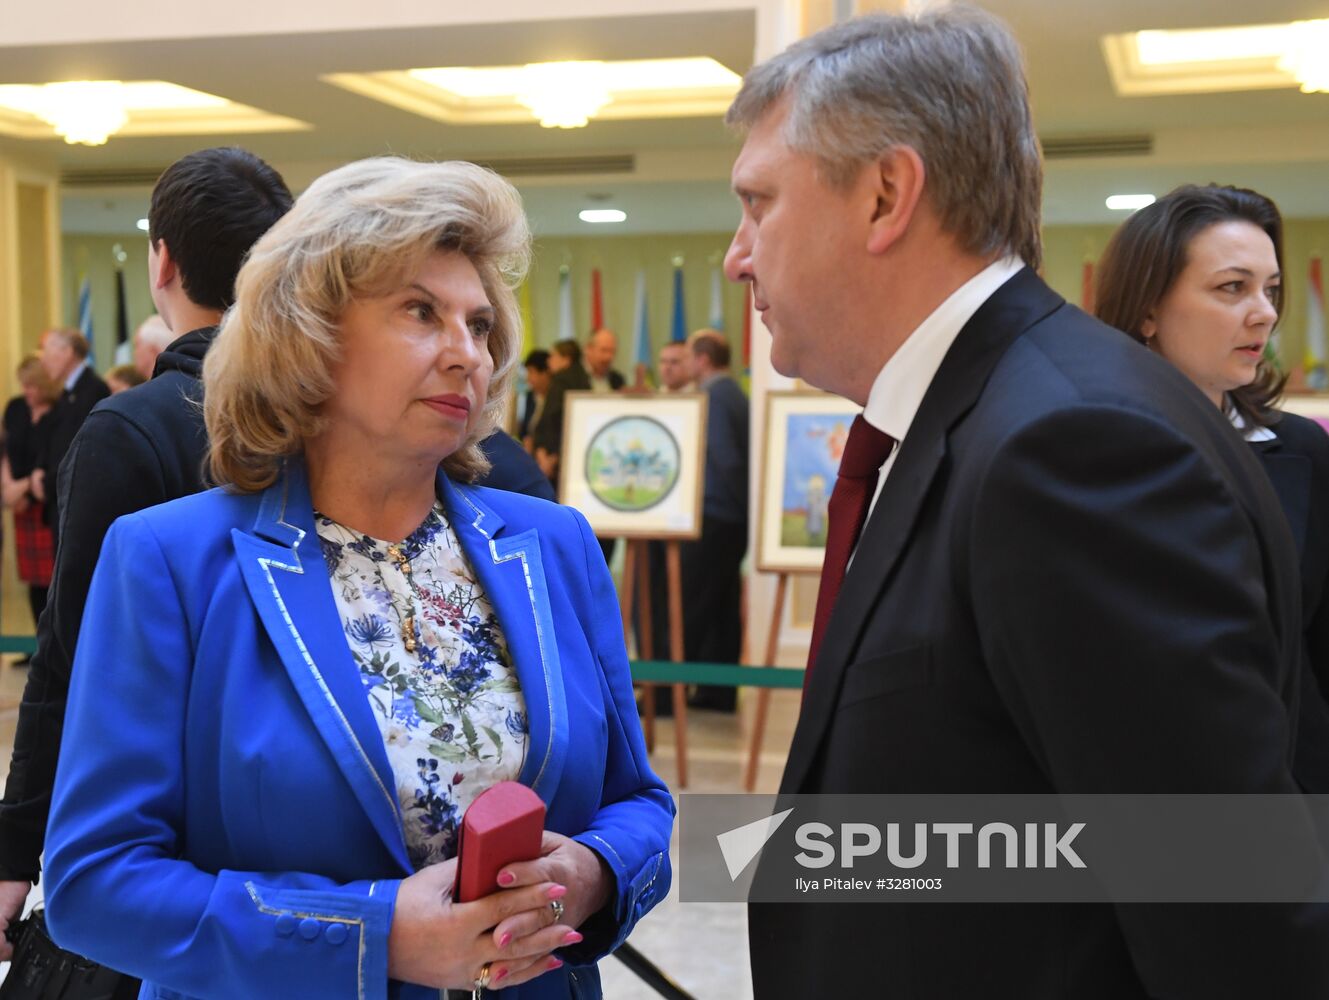 26th International Christmas Readings at Federation Council